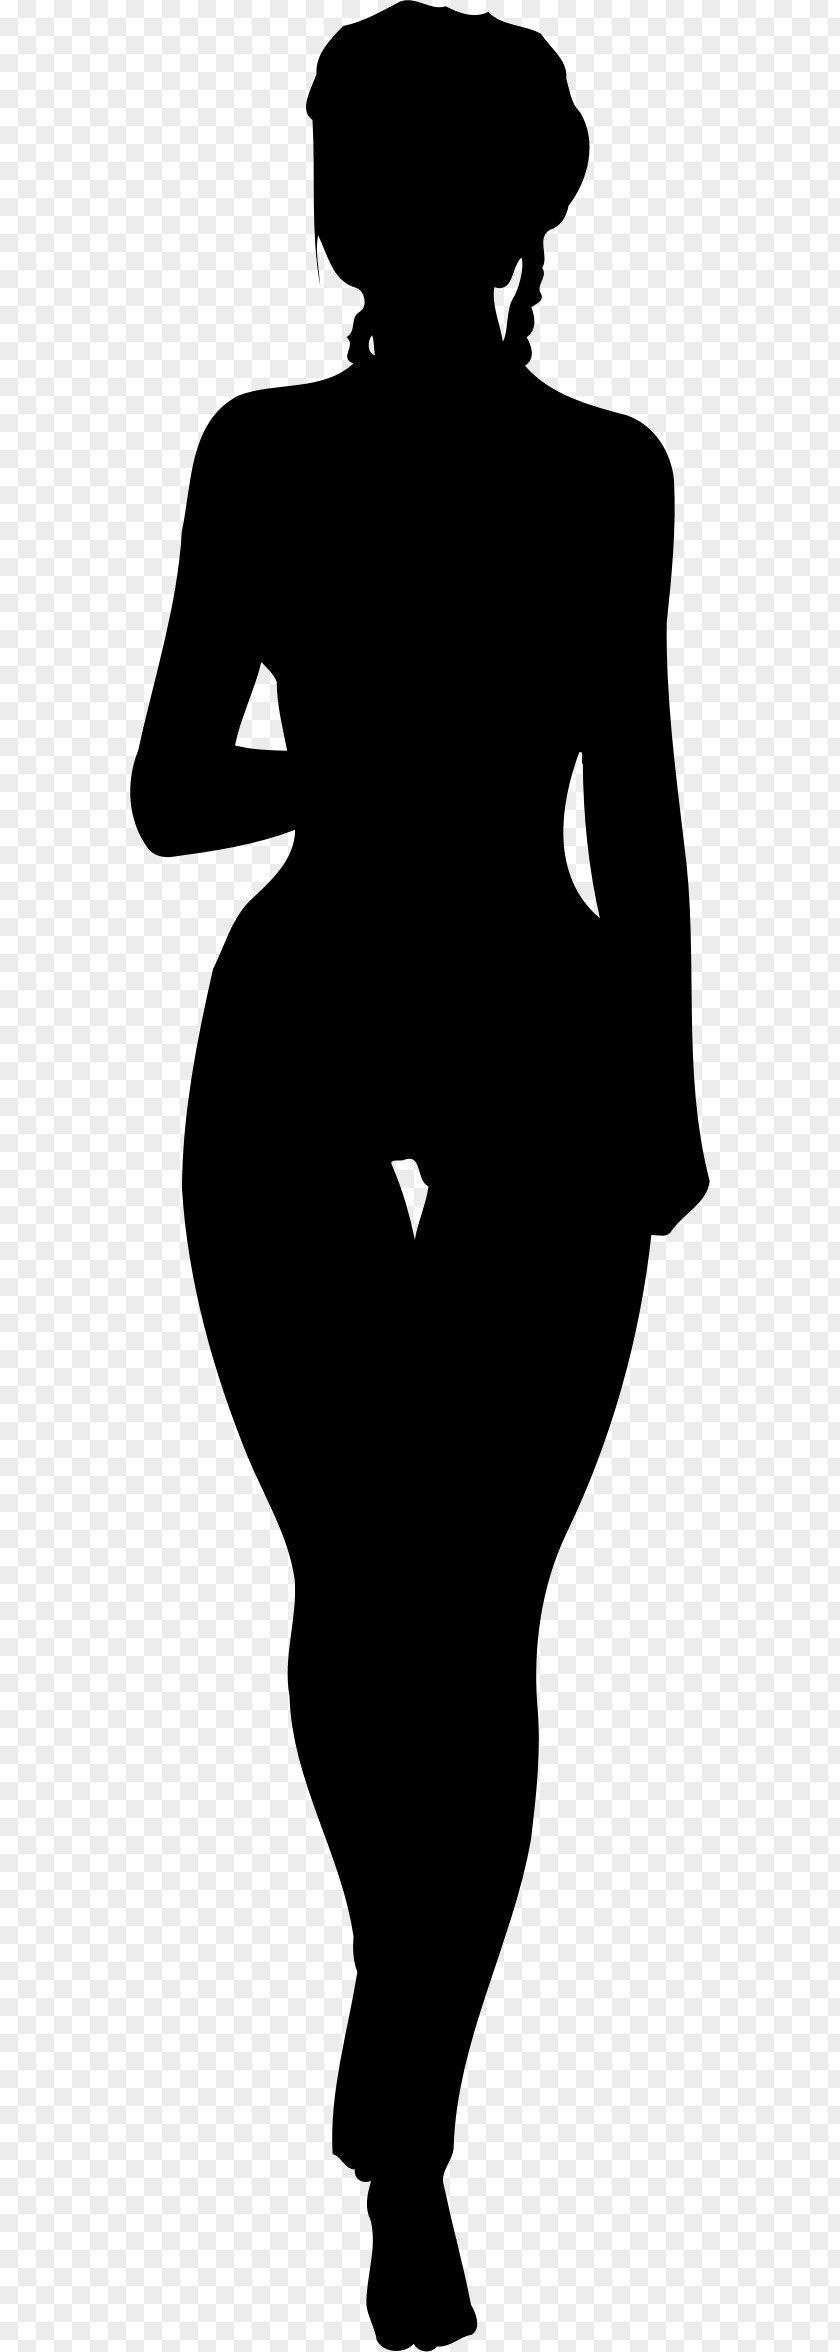 Walking Silhouette Photography Clip Art PNG